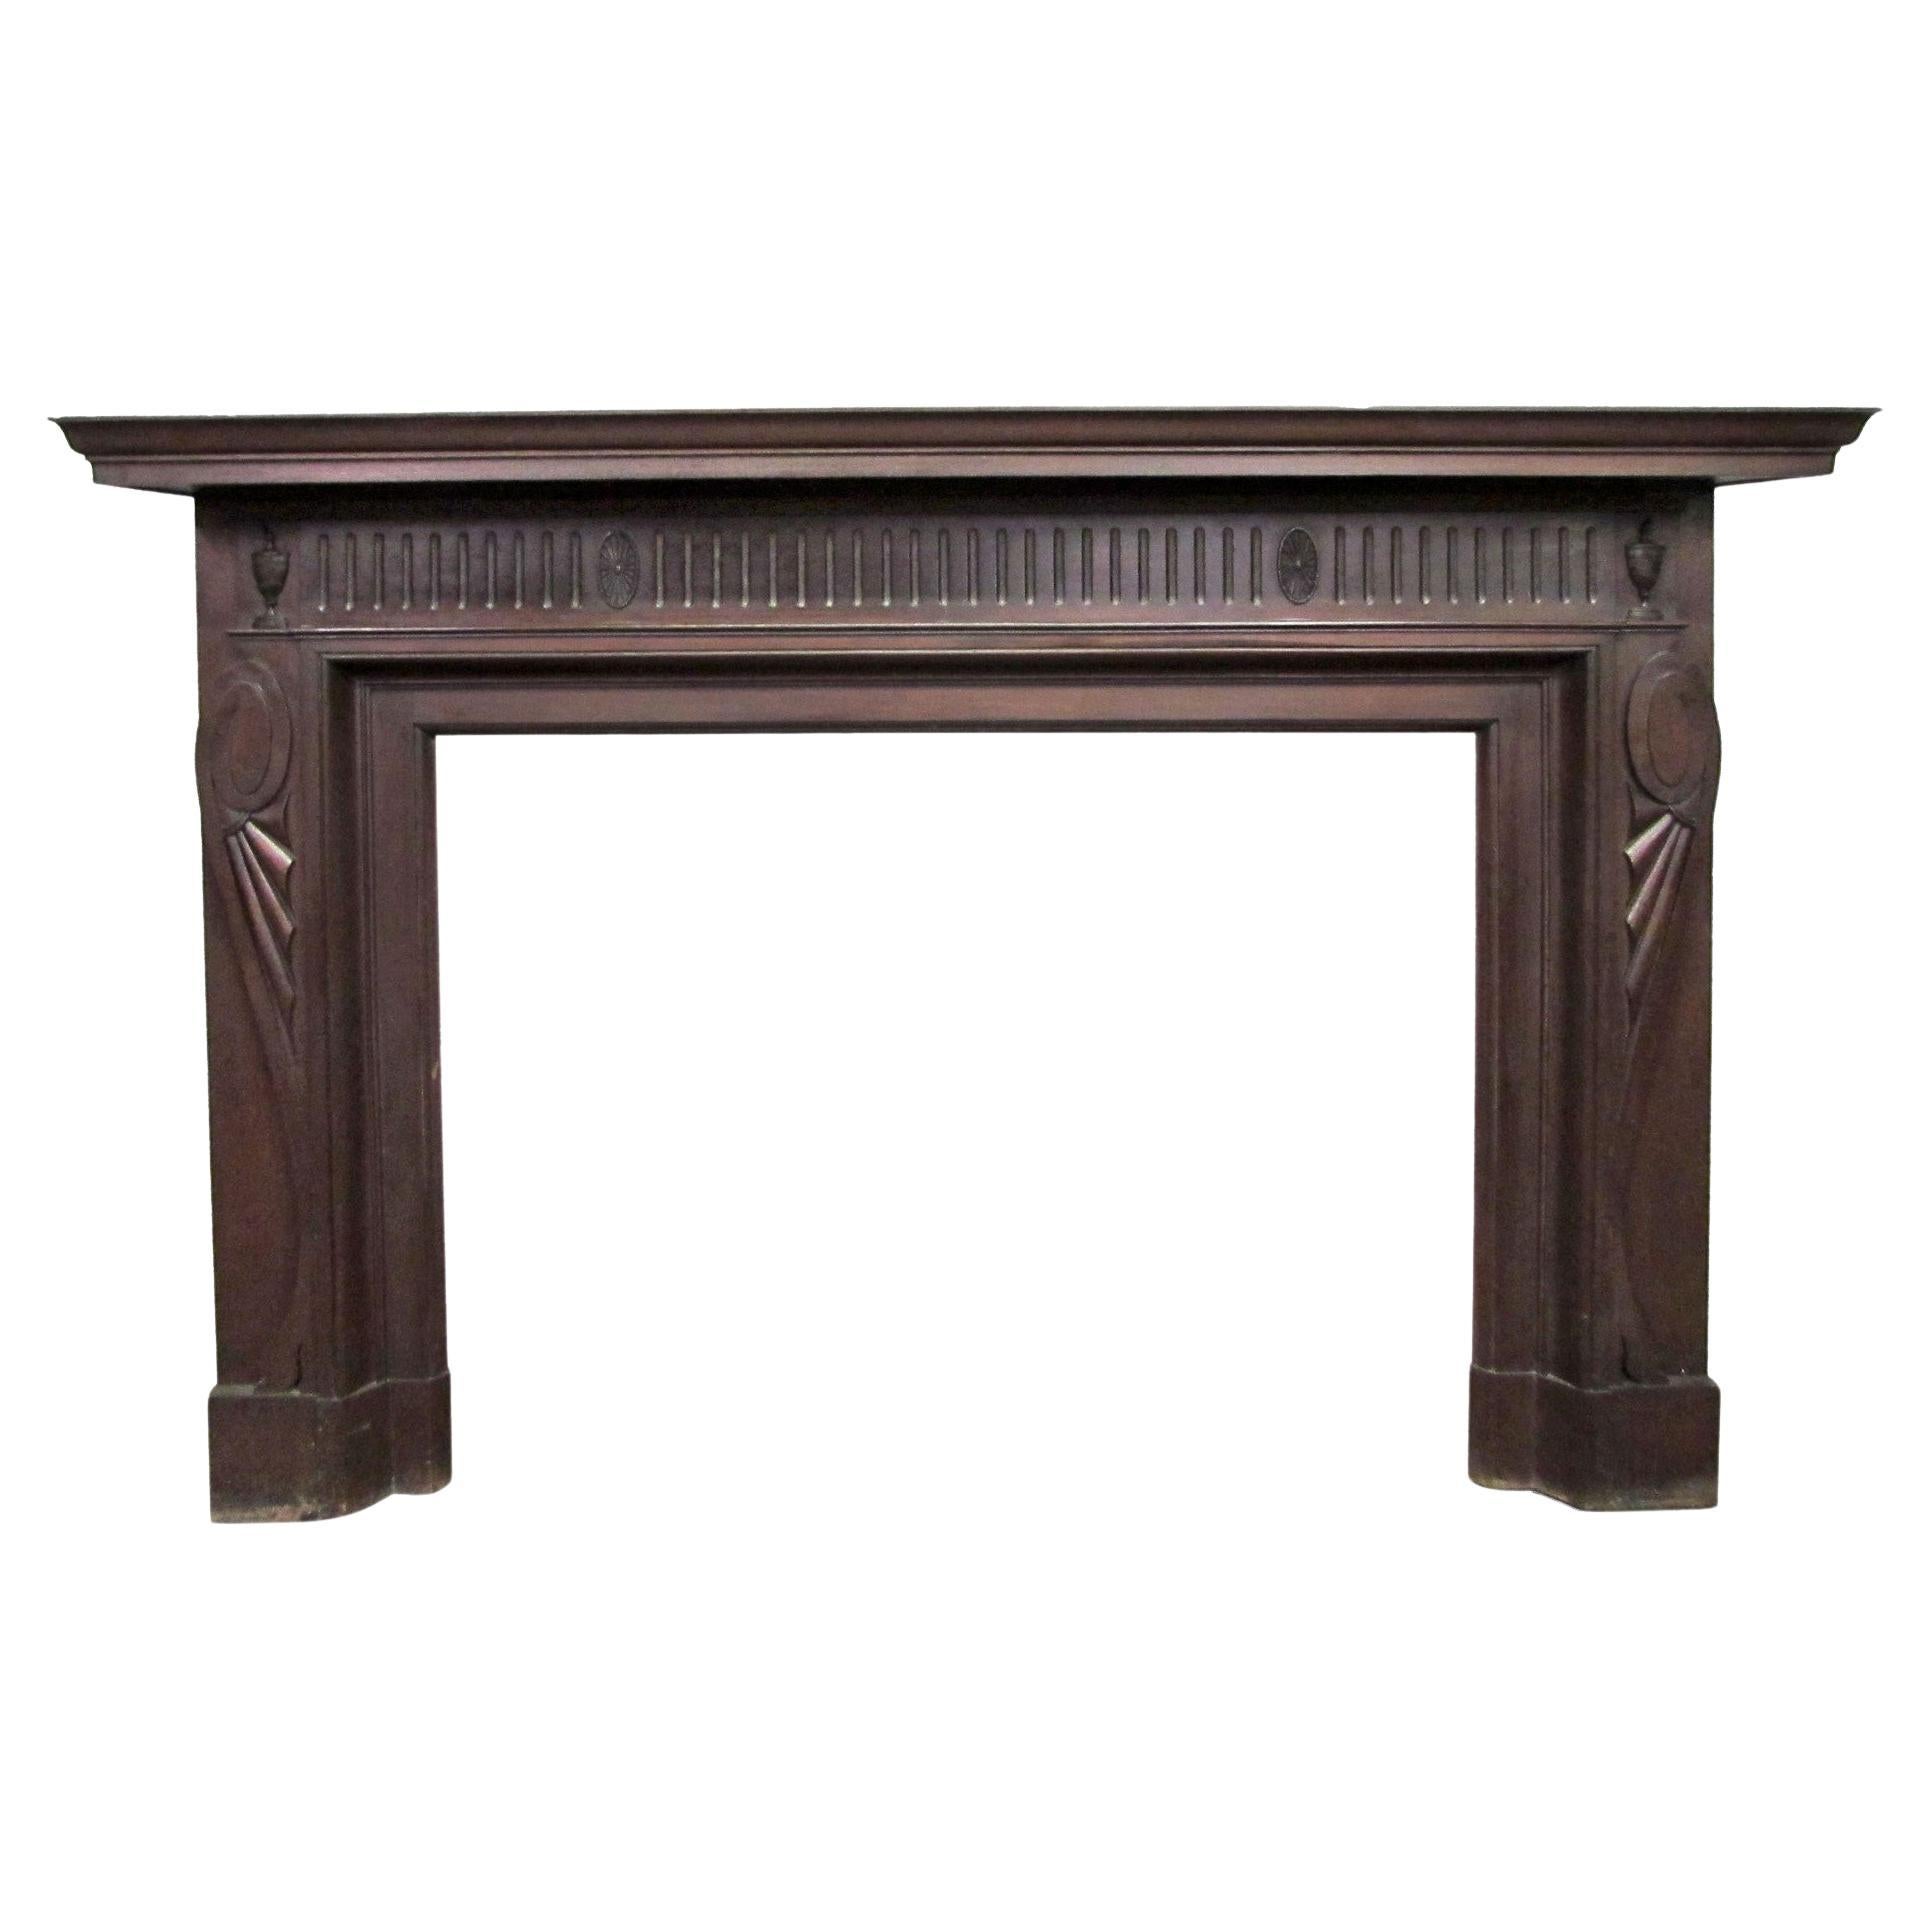 Early 1900s Solid Mahogany Federal Style Mantel